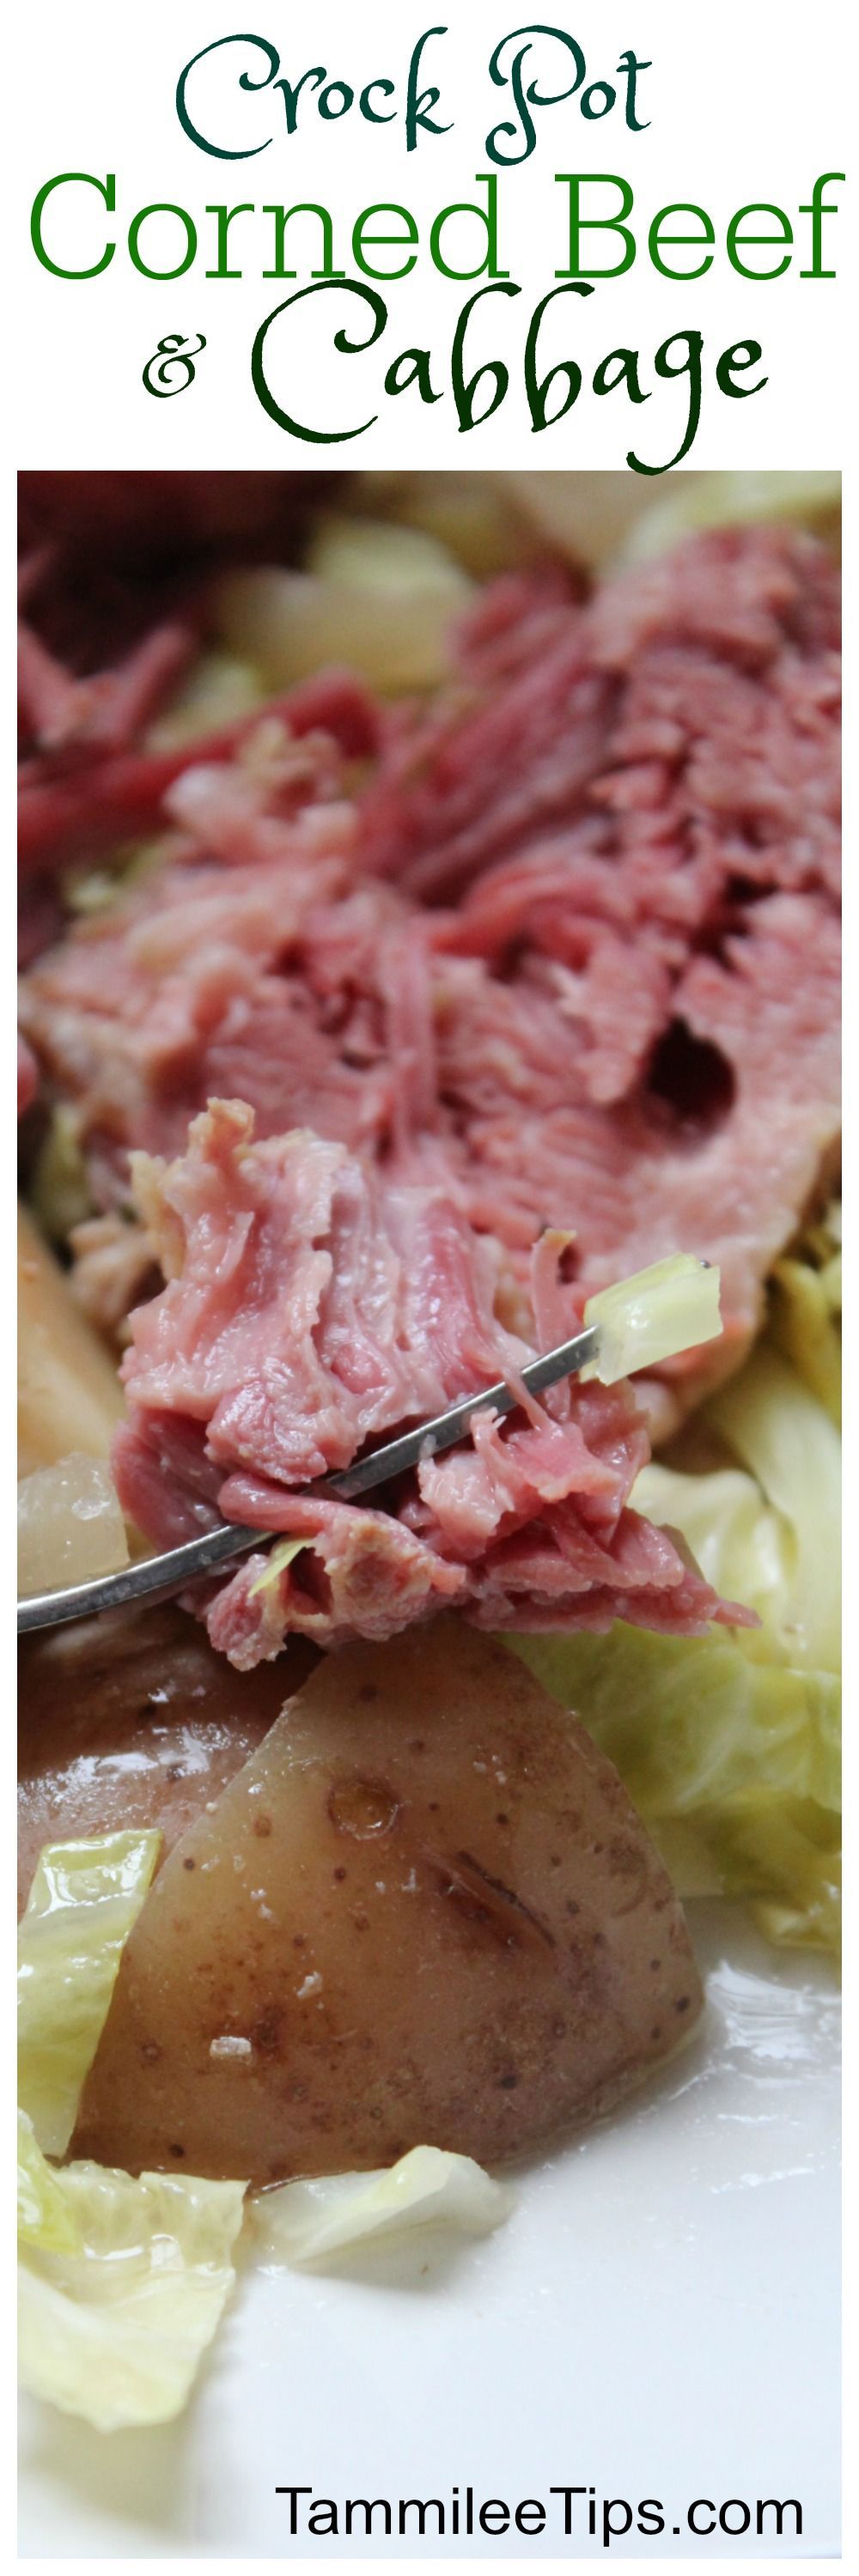 Crock Pot Corned Beef and Cabbage Recipe not just for St. Patrick Day! This easy slow cooker recipe is one of our best recipes!